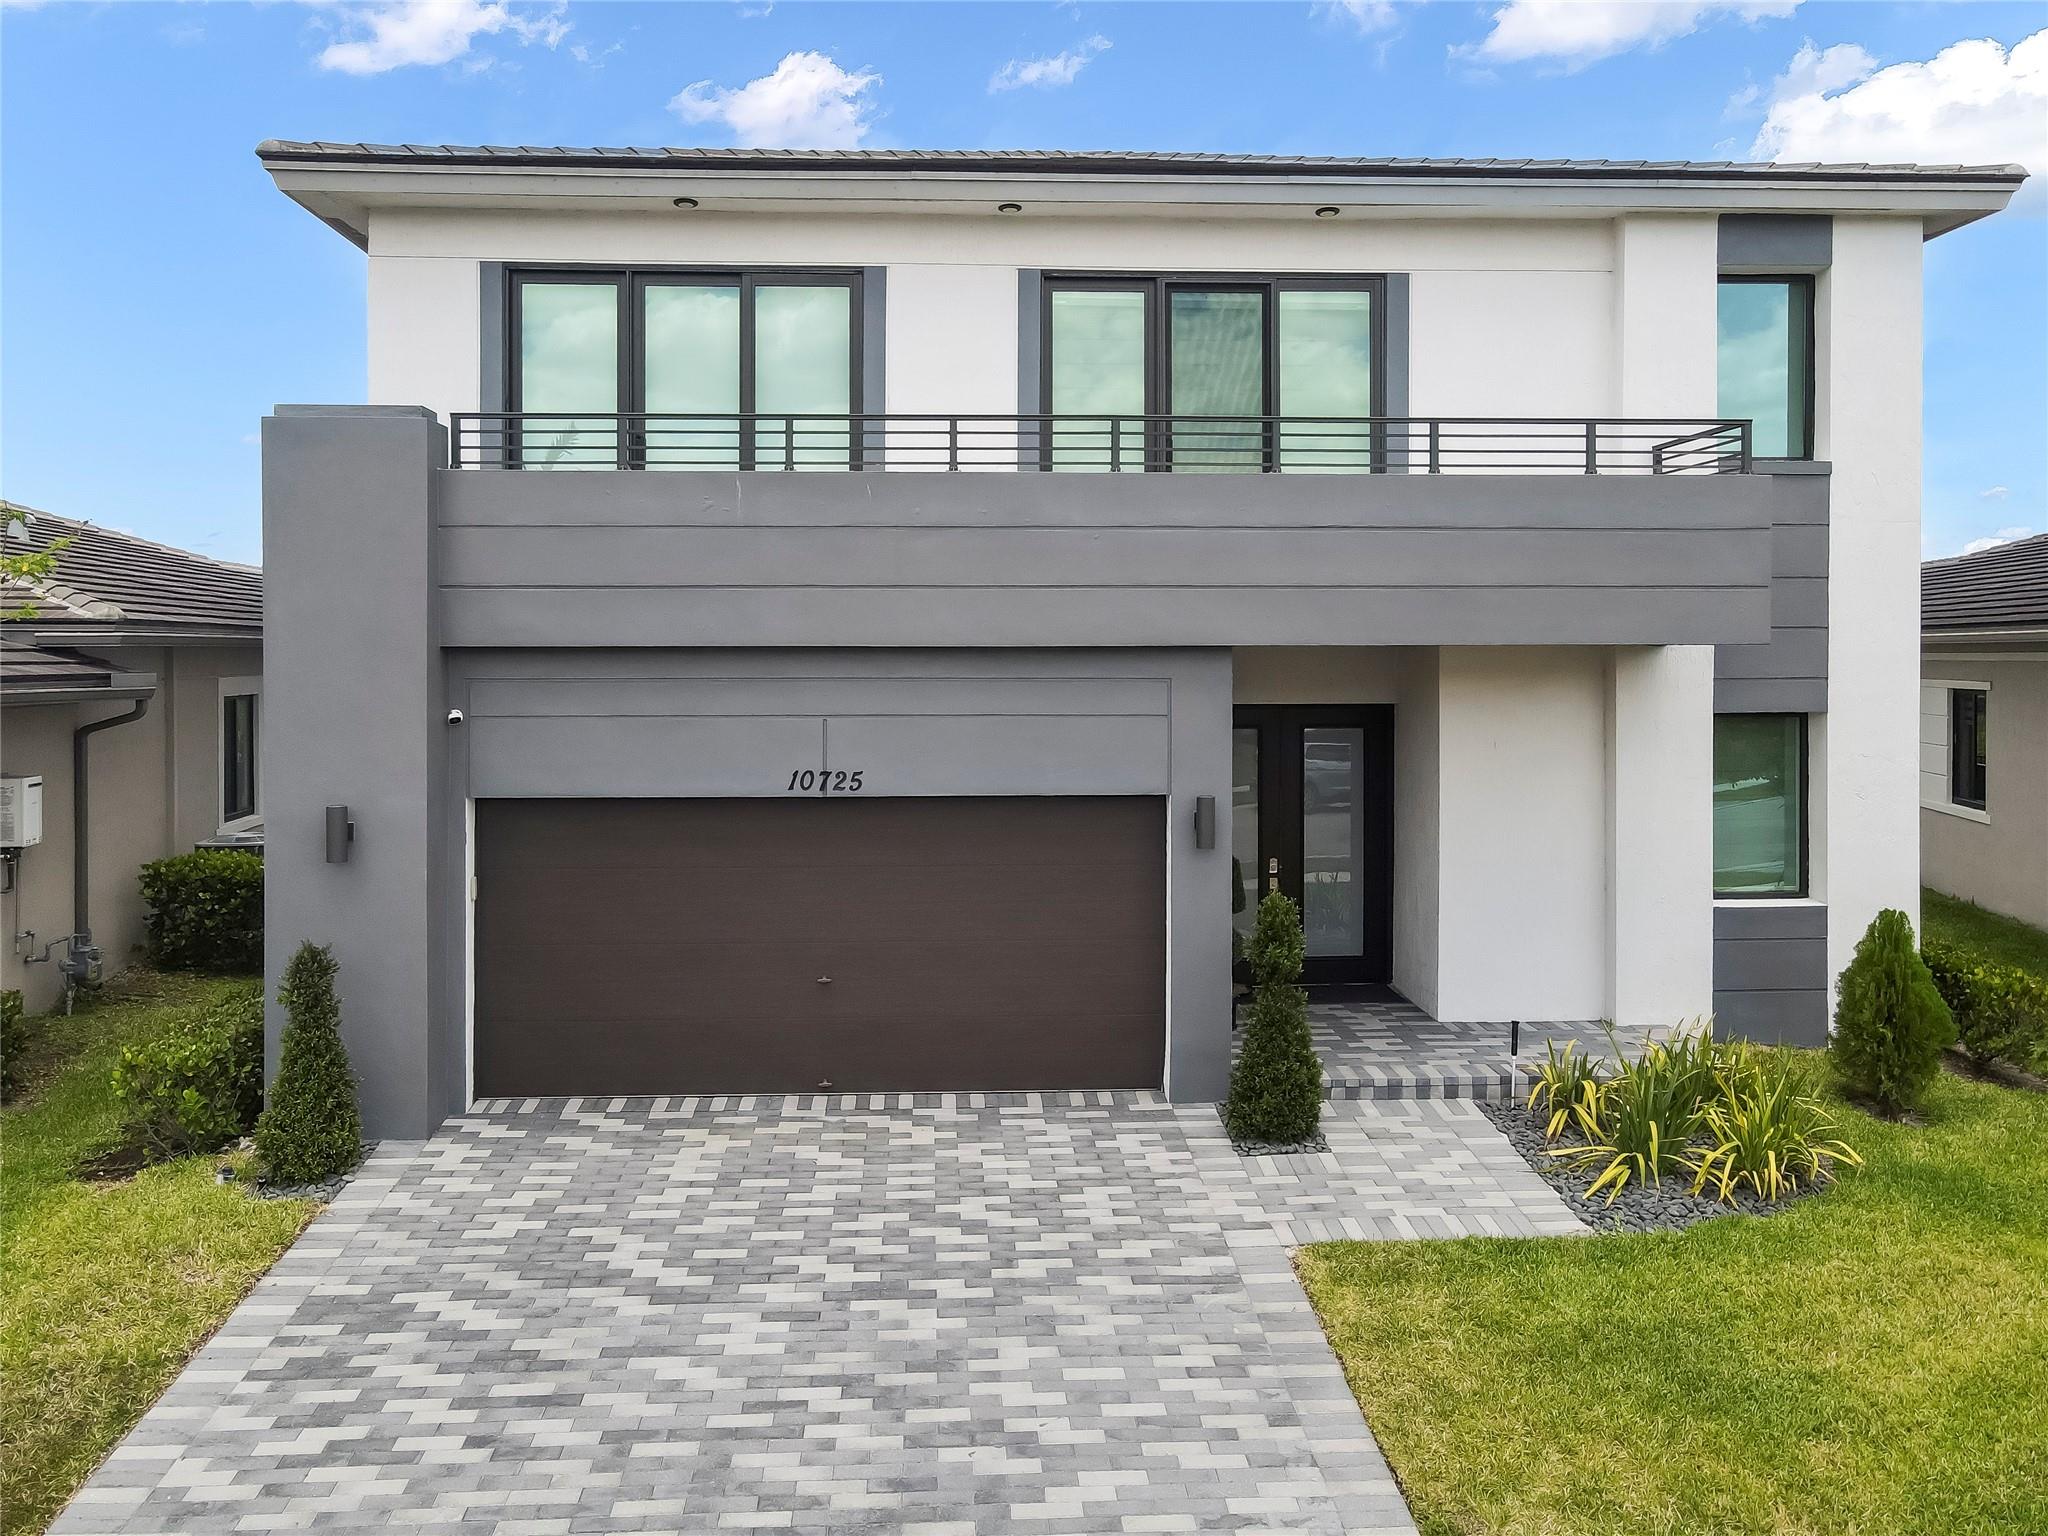 Welcome to this newly constructed (2019), beautifully upgraded 5 bed + loft, 4 bath, 4000+ sqft home featuring luxurious finishes & modern amenities. Energy efficient, smart home includes: impact glass windows & doors, "Shangri-La" terrace w/motorized shades, sleek white modern kitchen w/ gas stove, balconies, garage system w/epoxy floor, porcelain floors, luxury hard flooring, enormous primary bedroom w/ seating area, designer finishes, custom built in closets, oversized rear yard, fenced yard w/ "Toad Buster" pest security, 1st flr guest bedroom. Experience comfort & sophistication in this meticulously designed oasis. The 2 clubhouses include a resort-style pool ambiance, expansive pool & party rooms, tennis courts, indoor basketball courts, gym, & lap pools. 24 hr guard gated community!